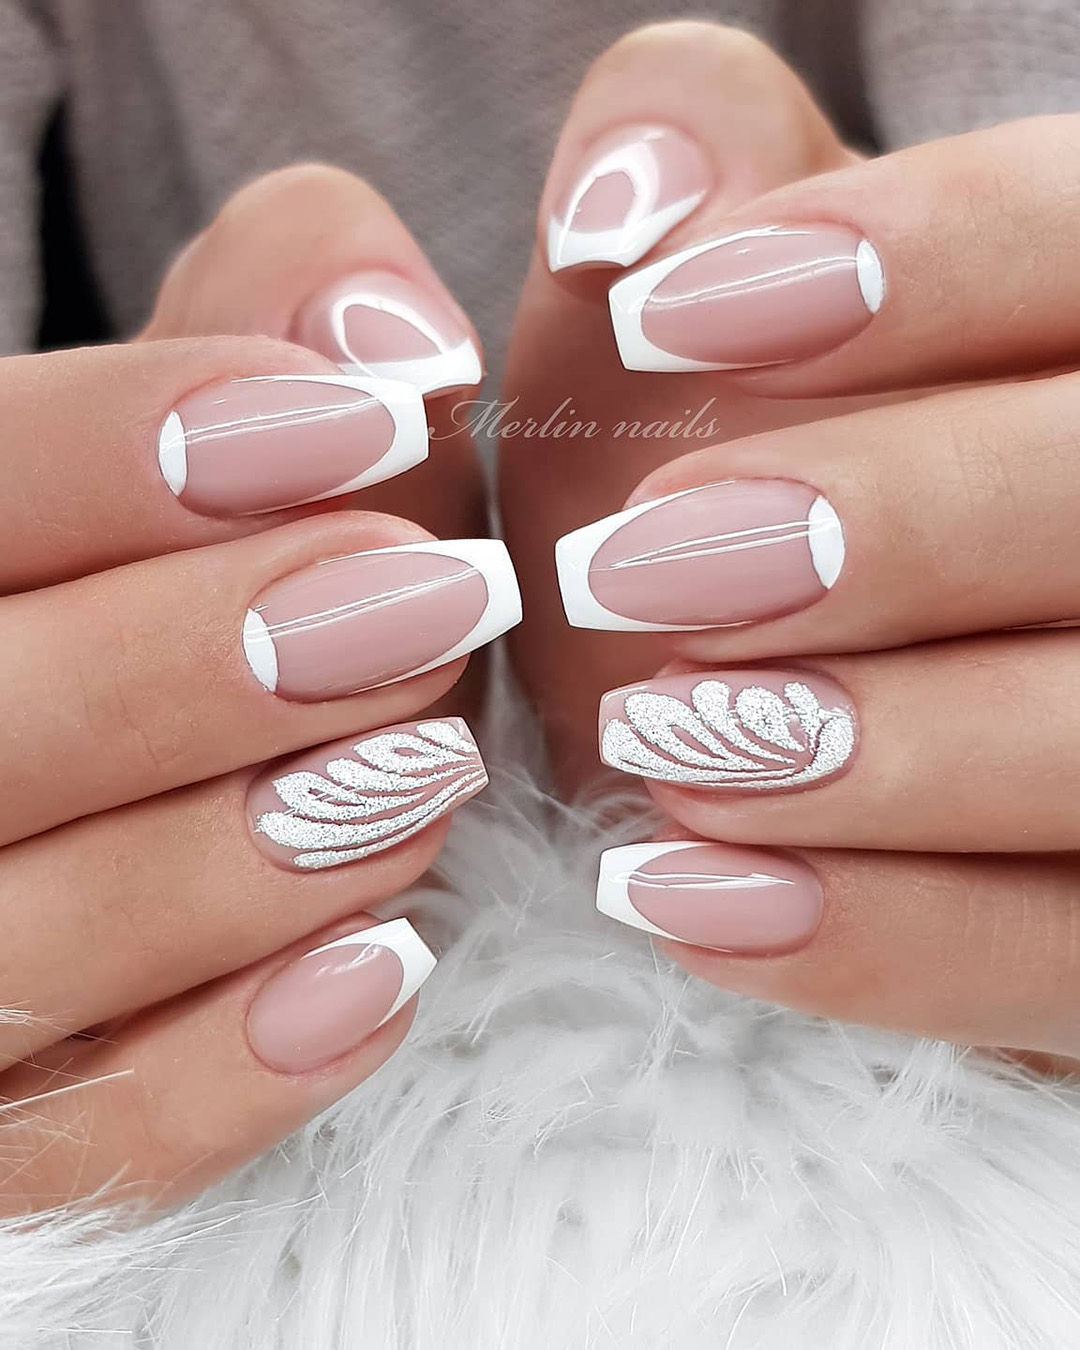 french wedding nails lace design and white tips merlin_nails